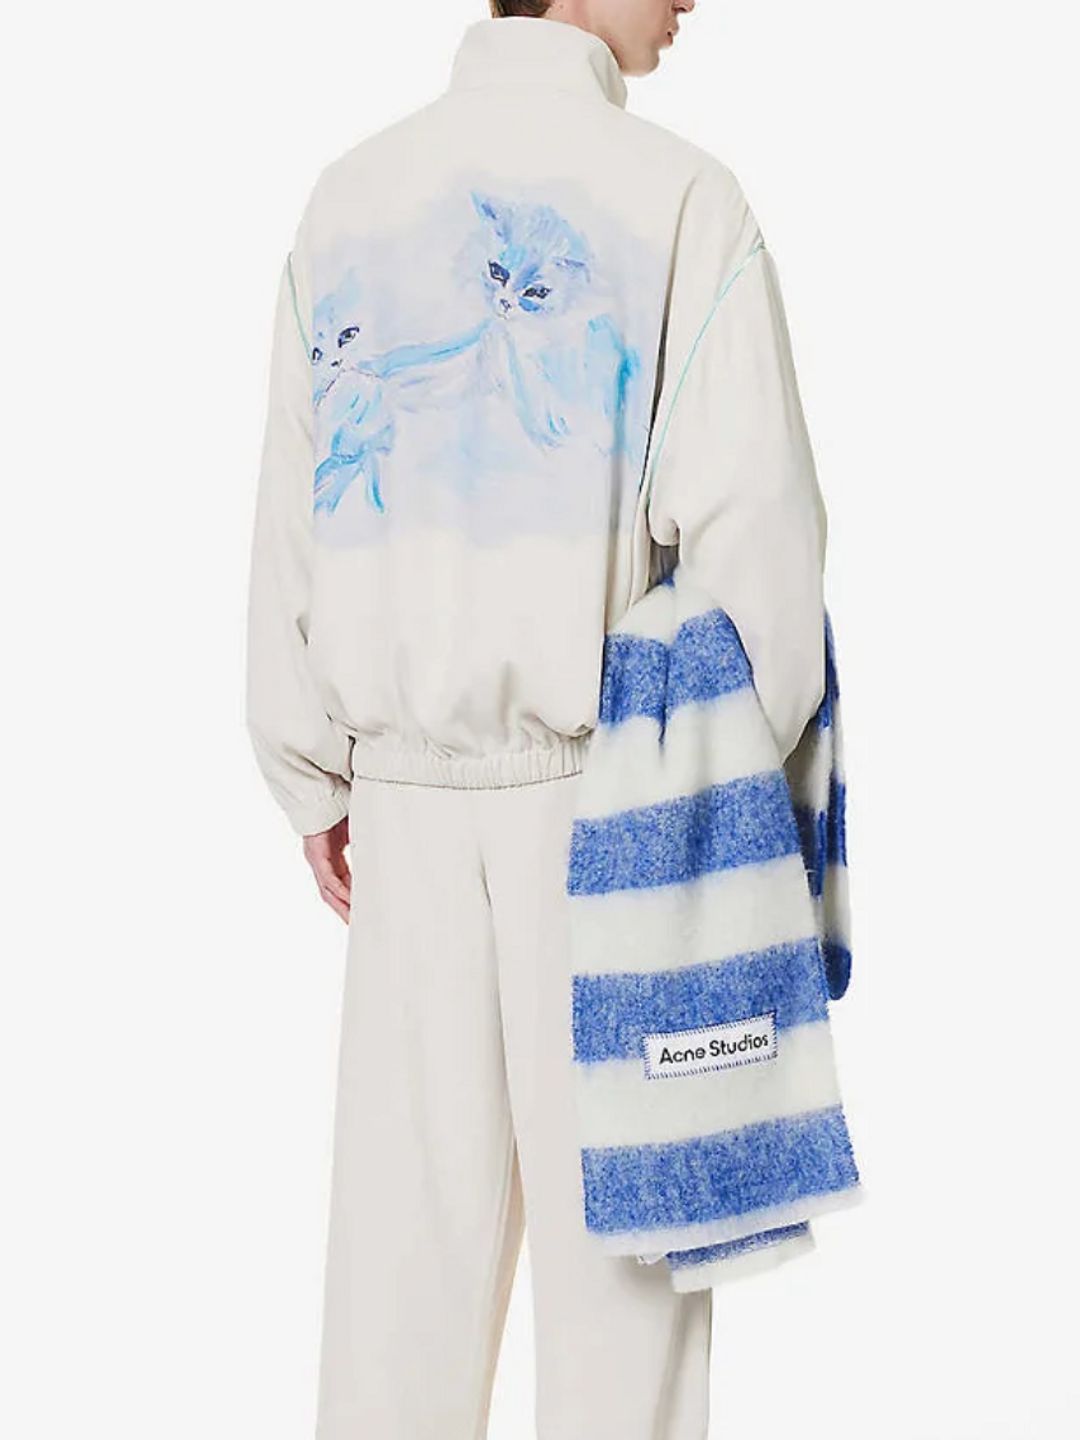 Acne Studio's new collection feature water colour cat motifs  